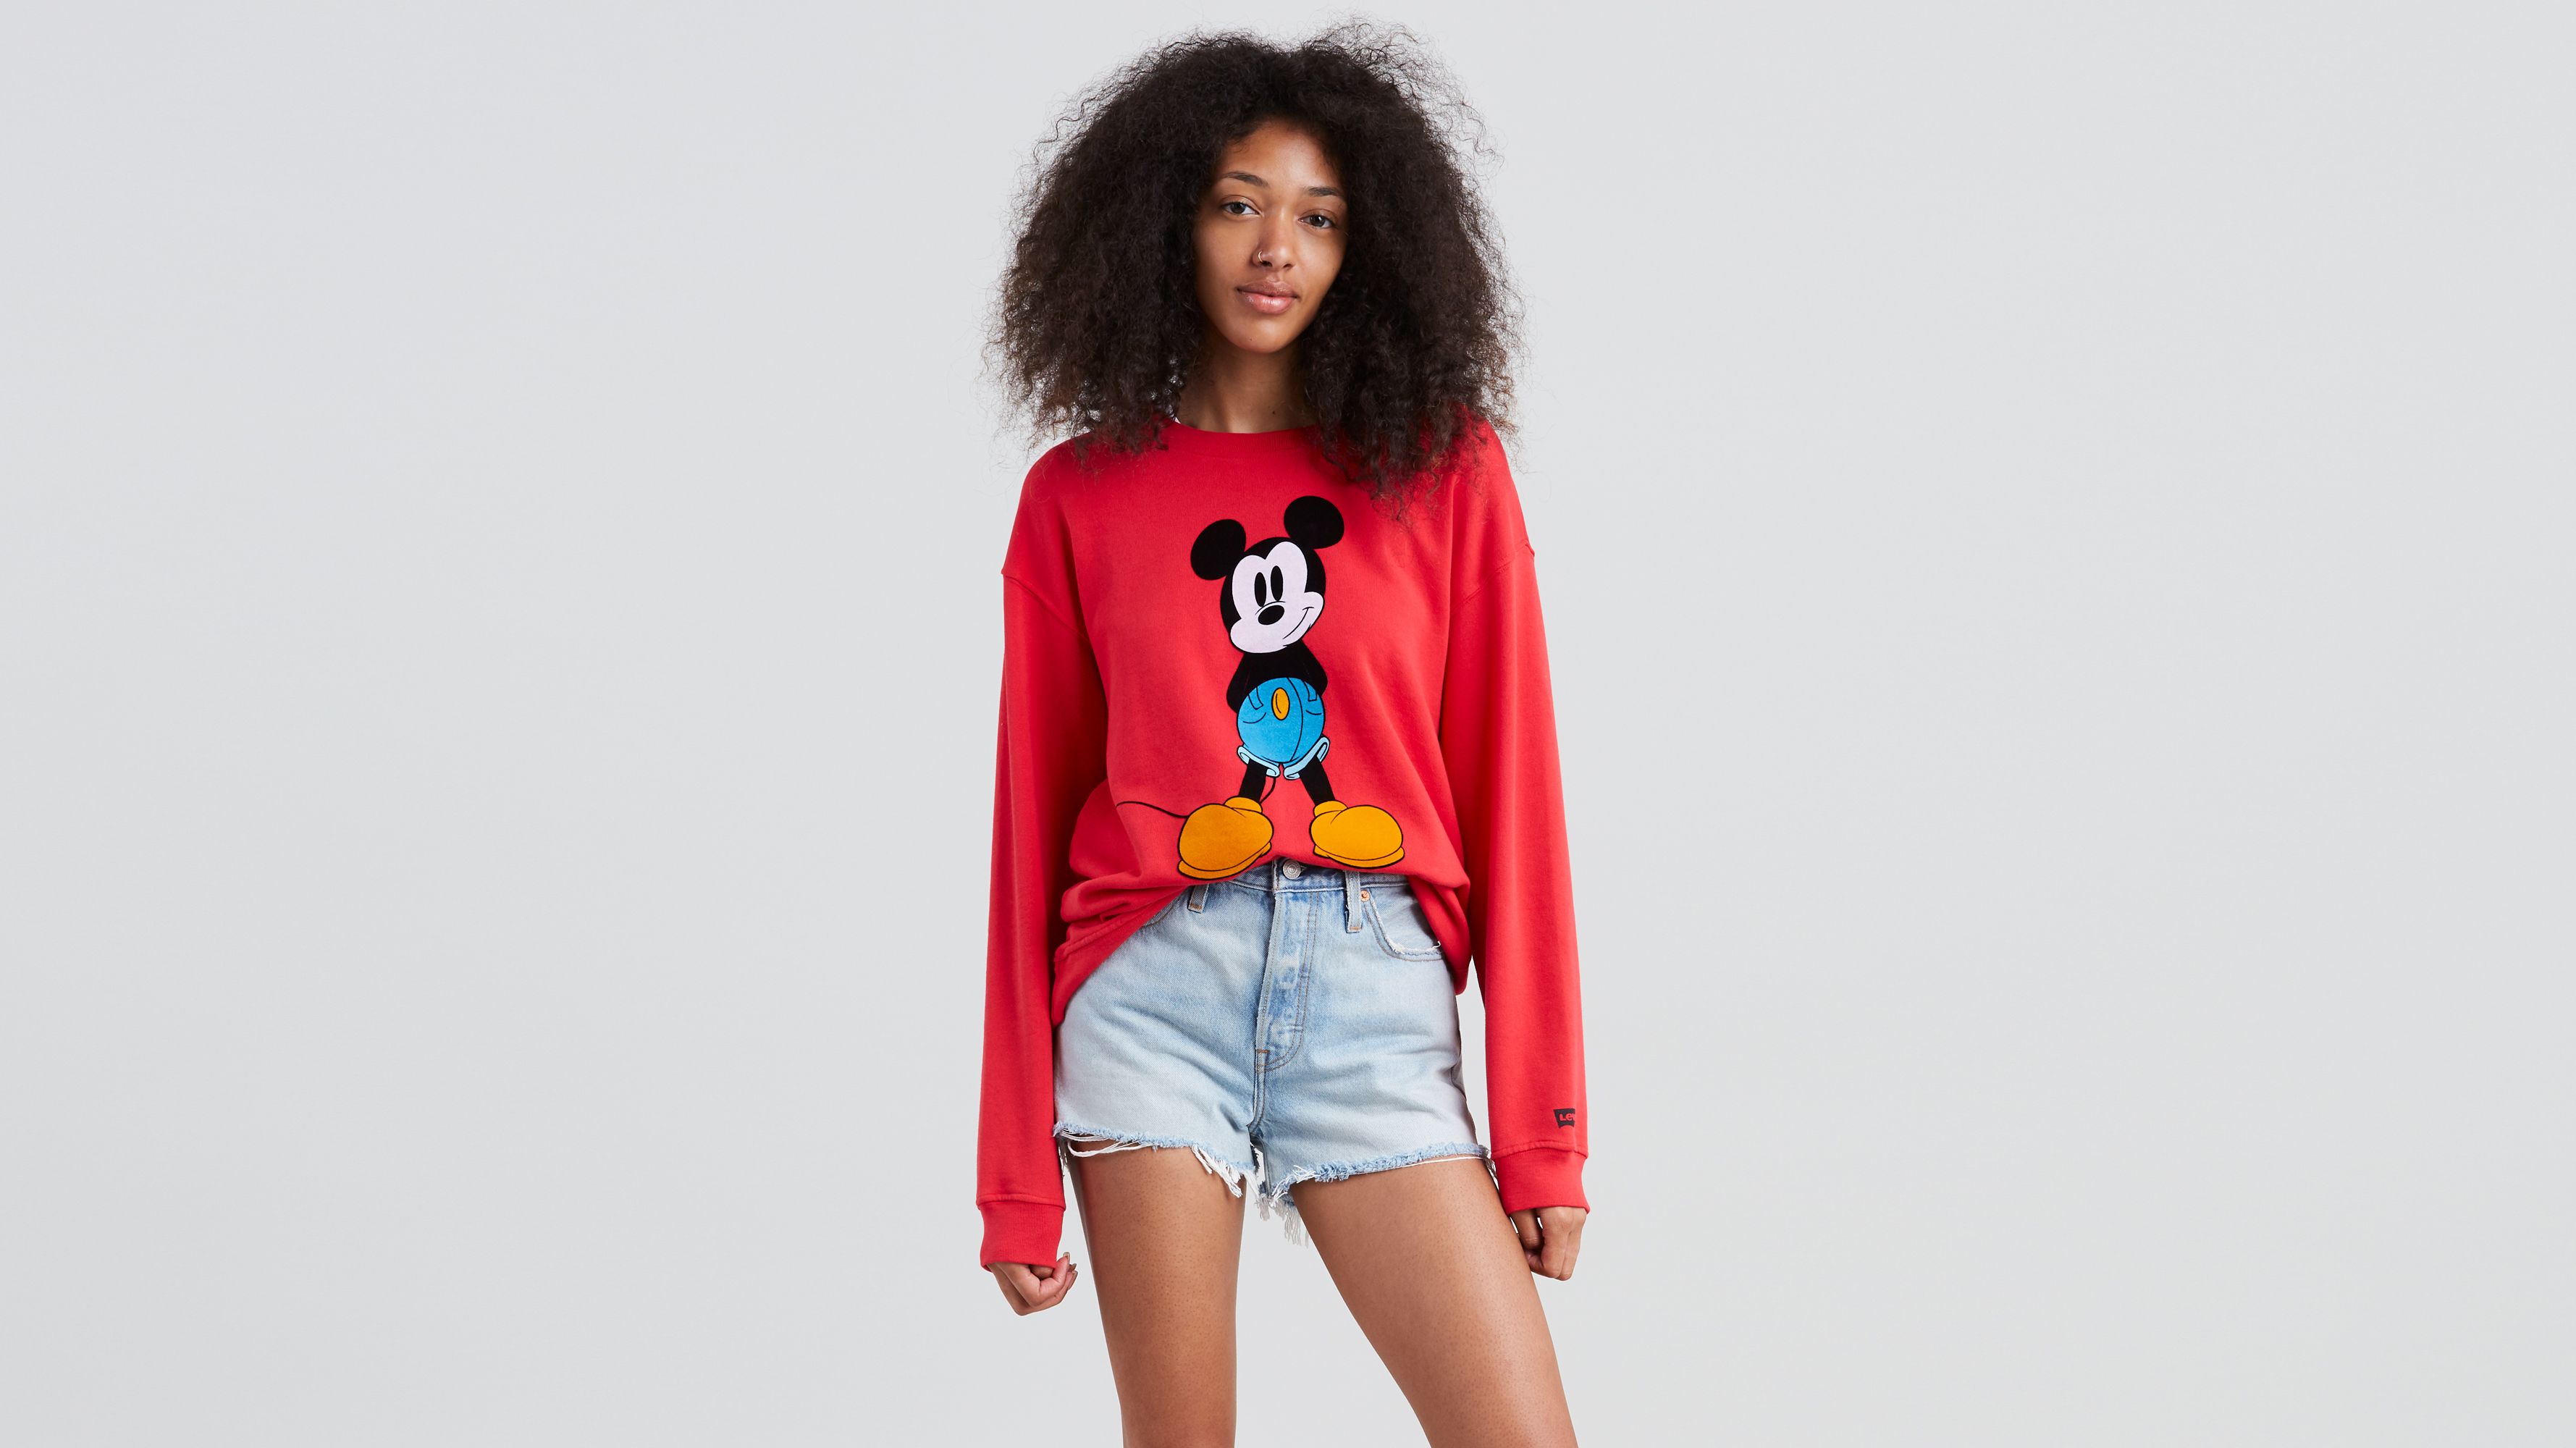 levi's mickey mouse hoodie